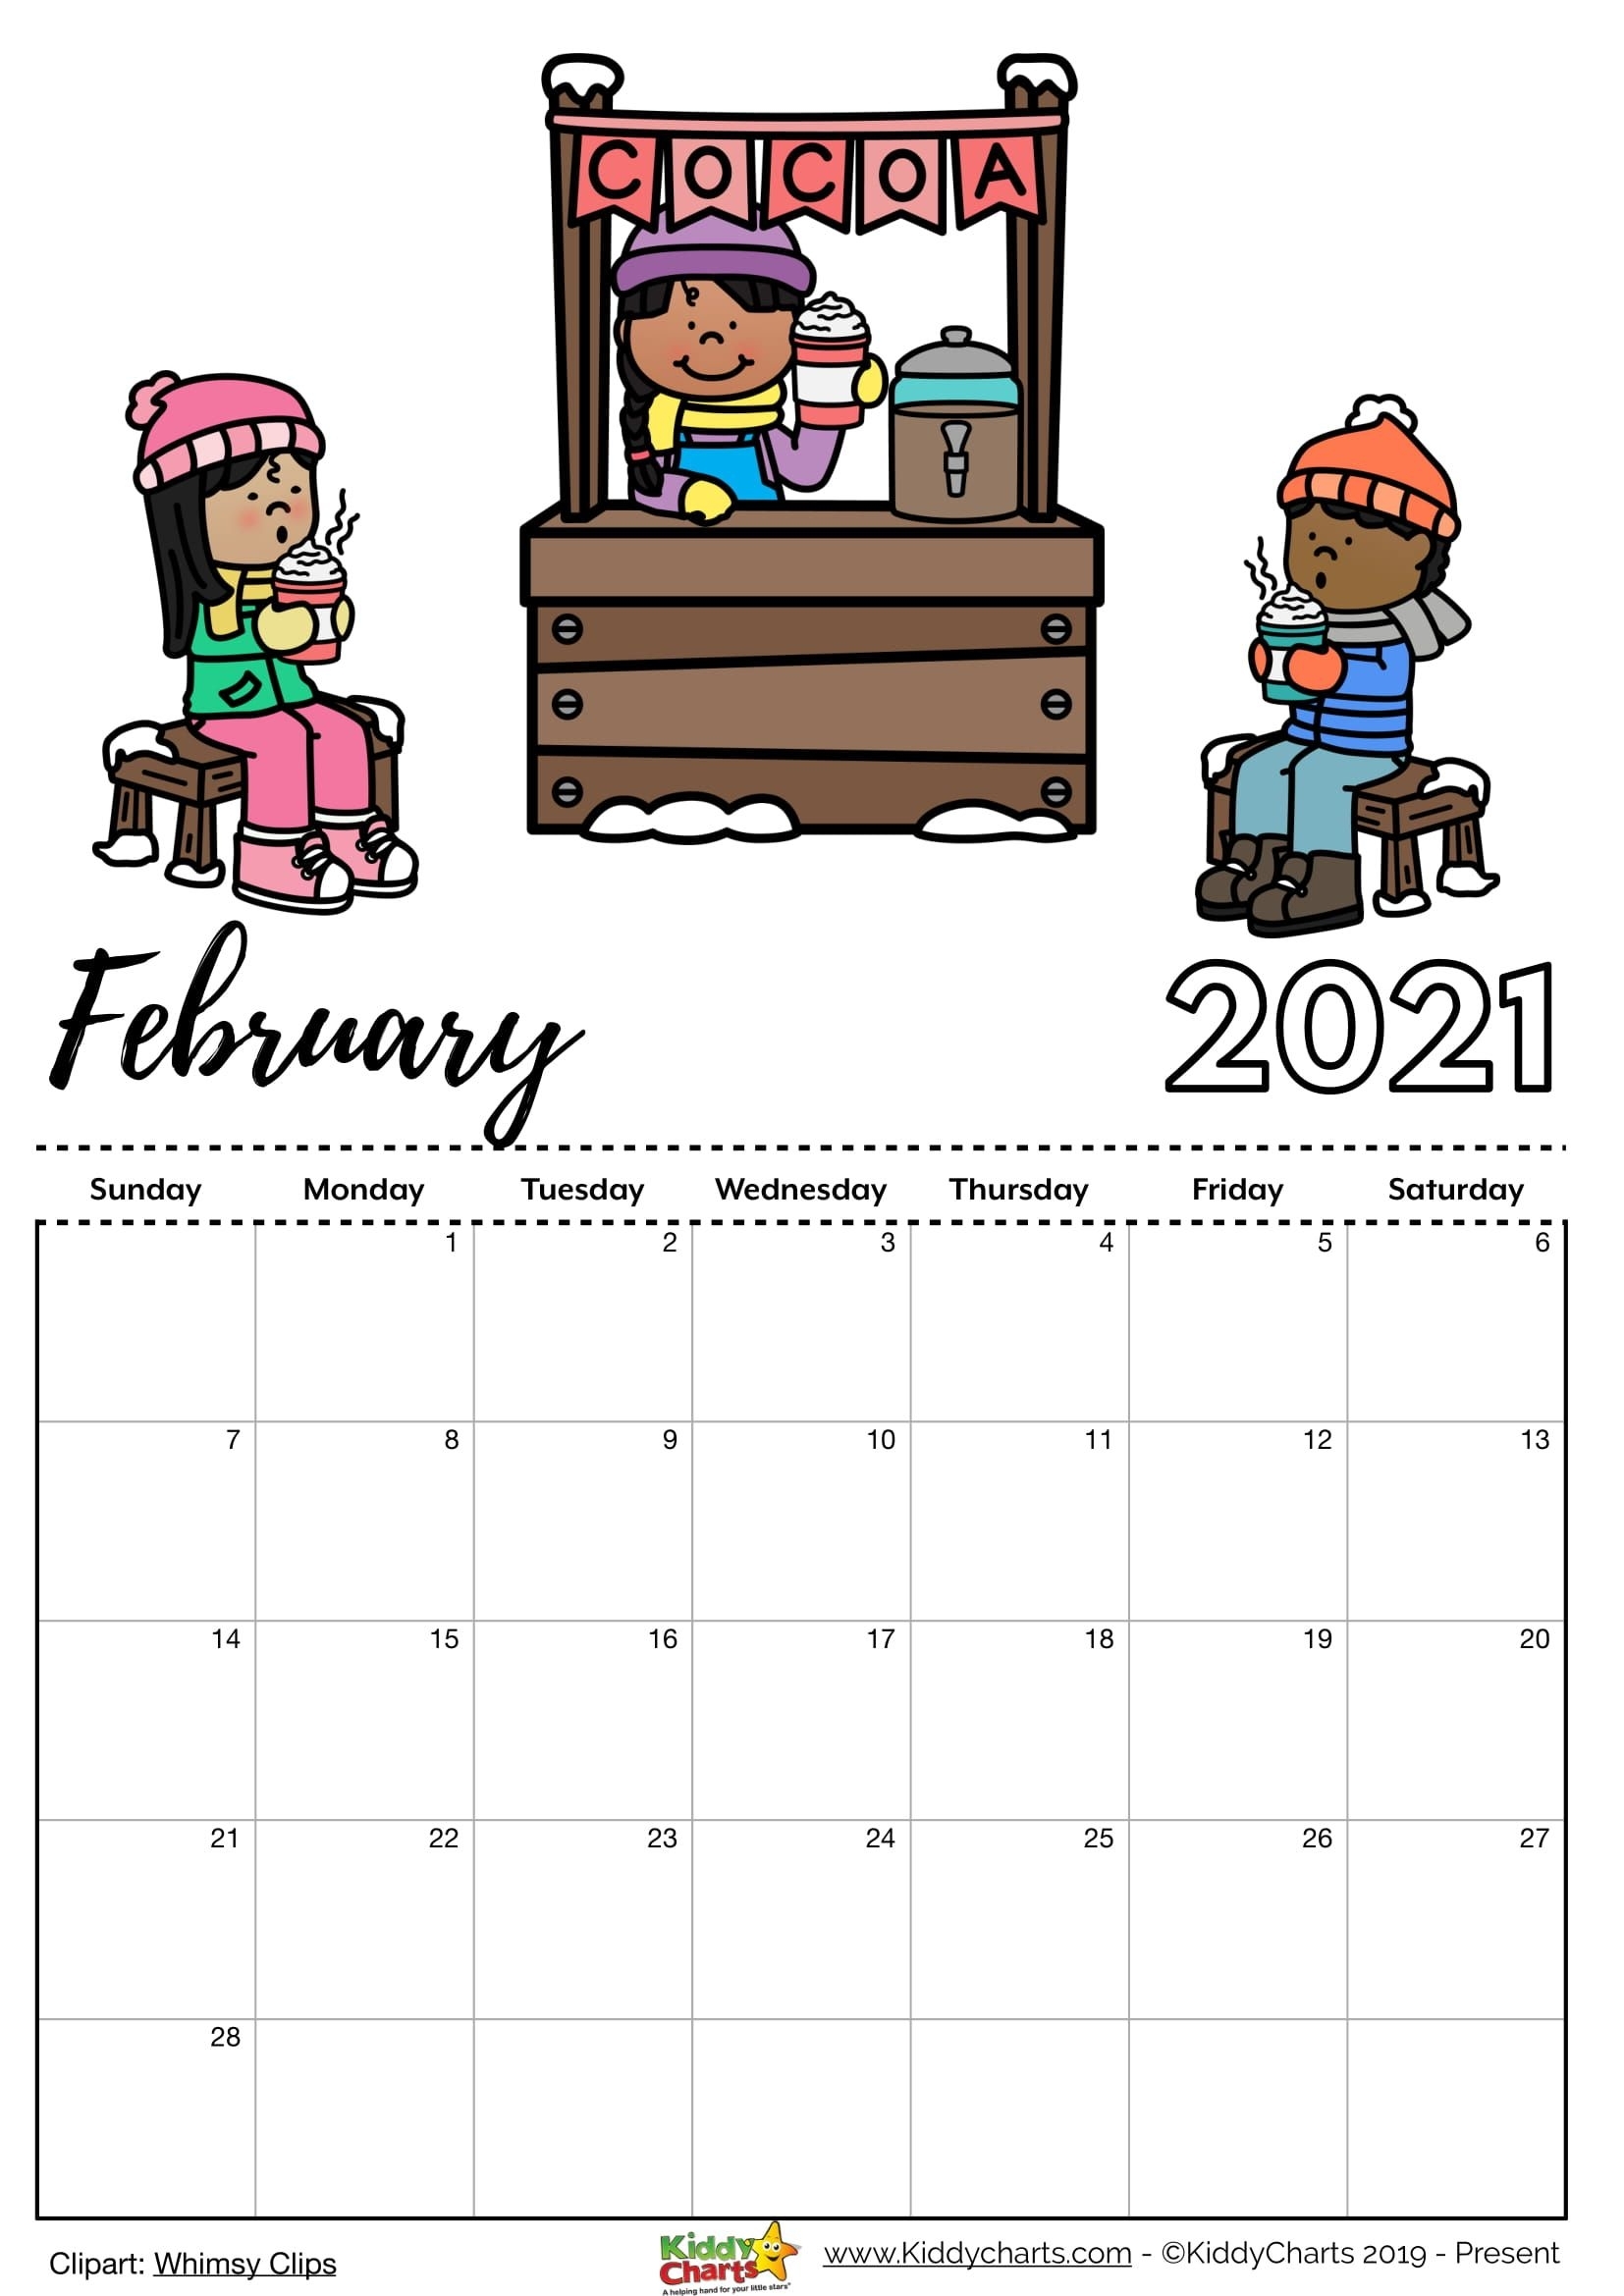 Check Our New Free Printable 2021 Calendar! In 2020 | Kids